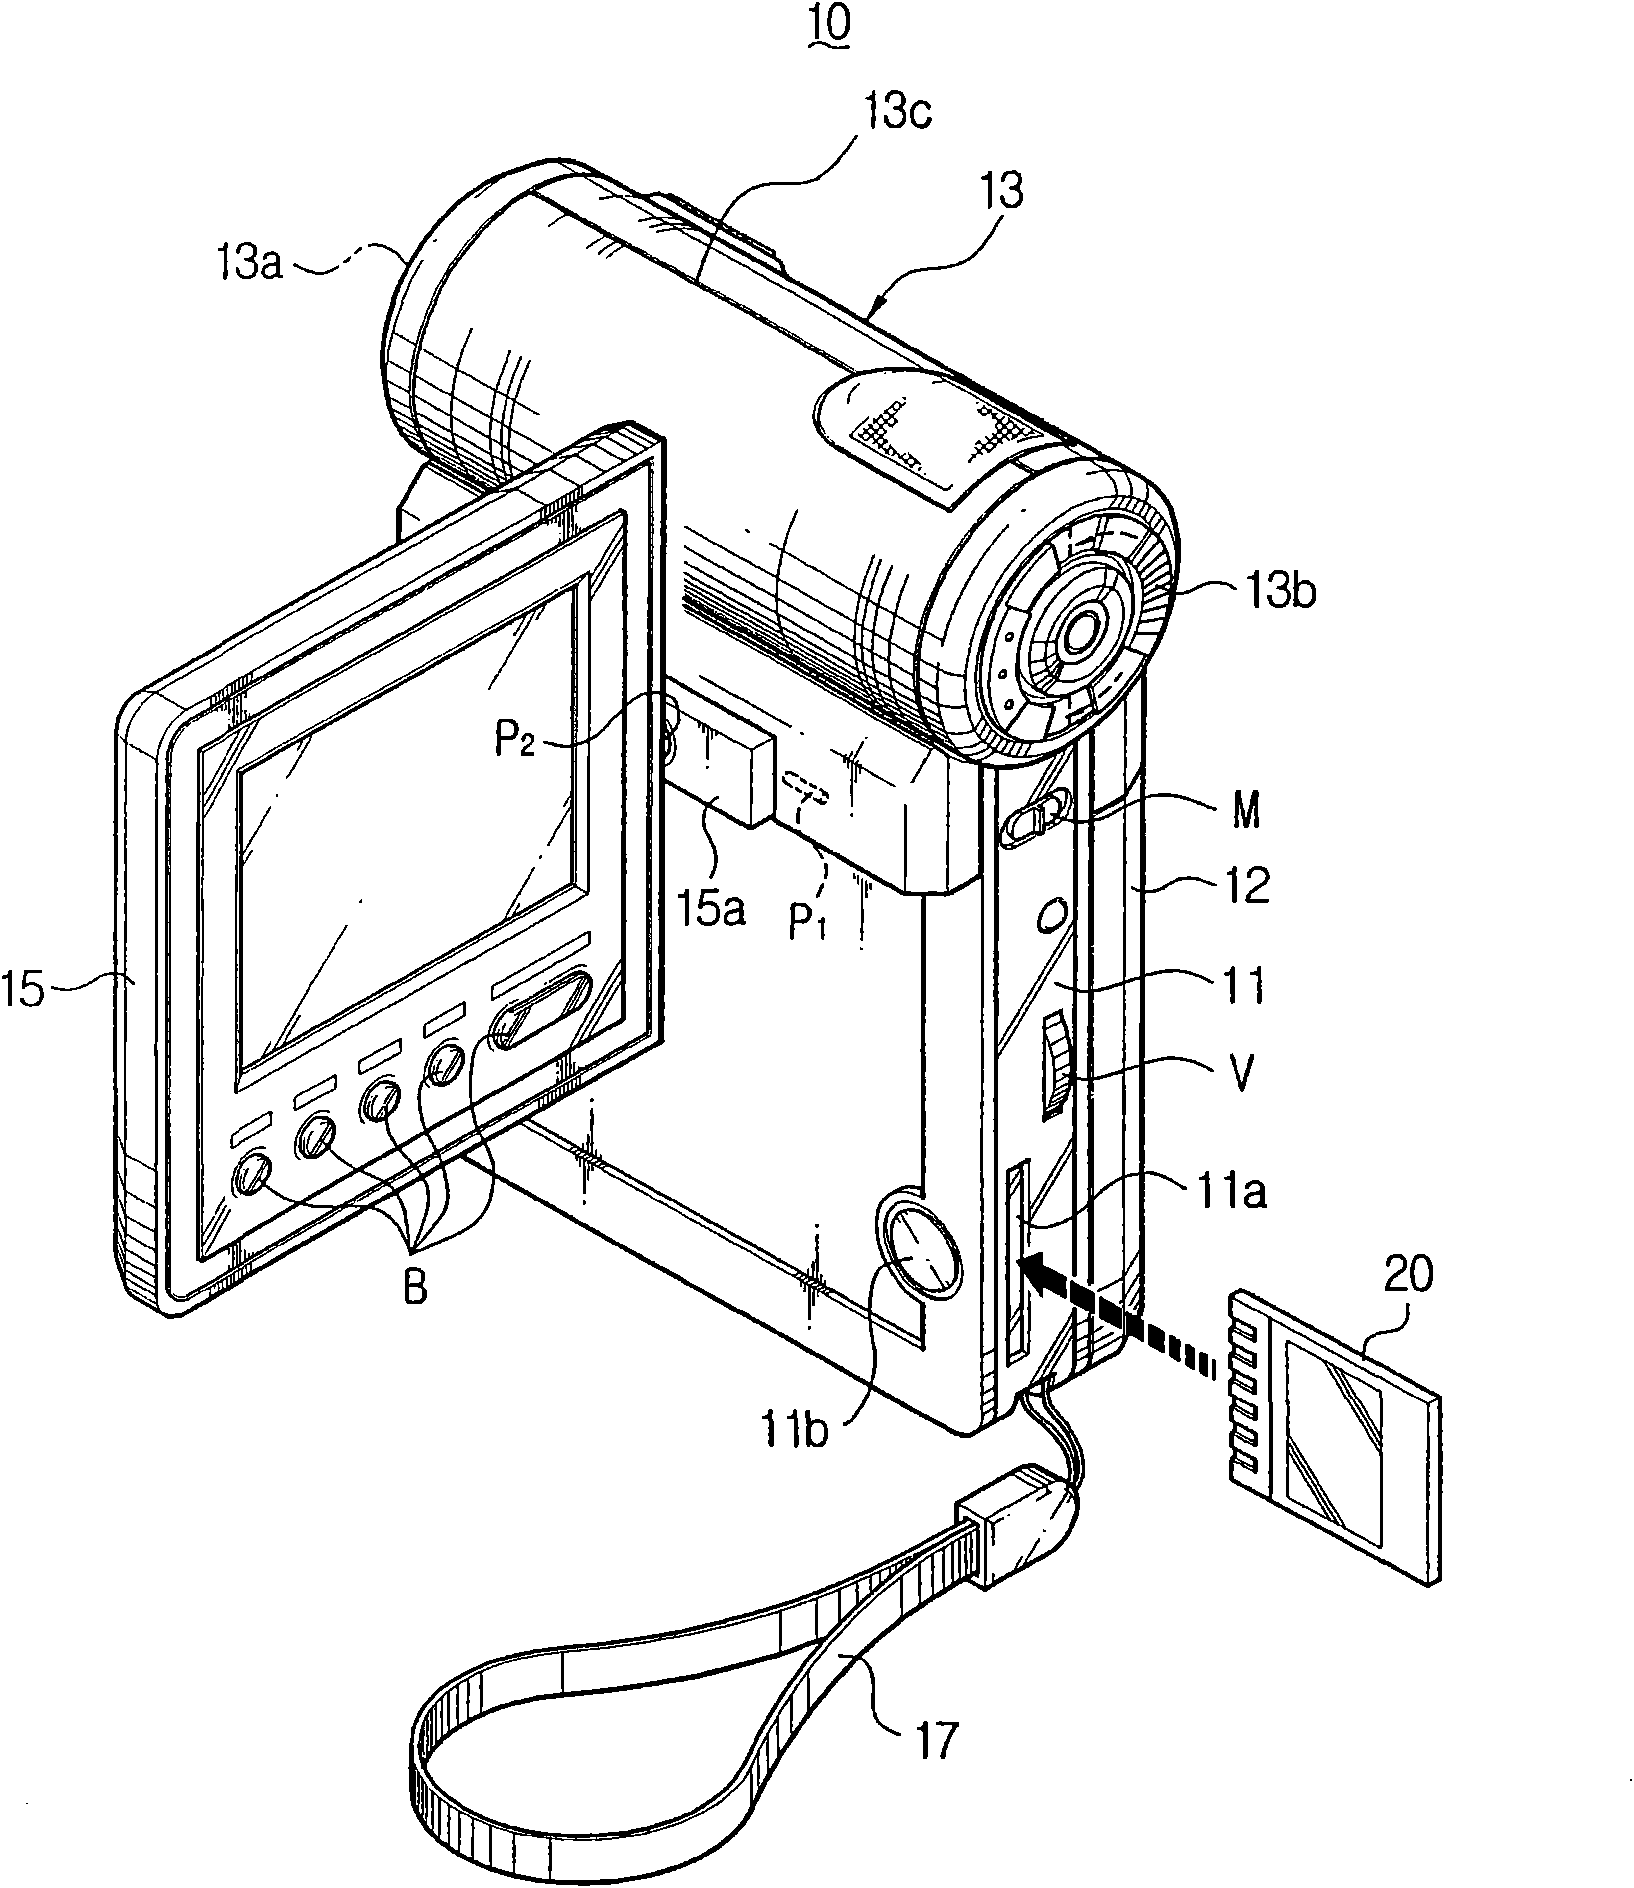 Video frequency and audio frequency data recoding and reproducing apparatus